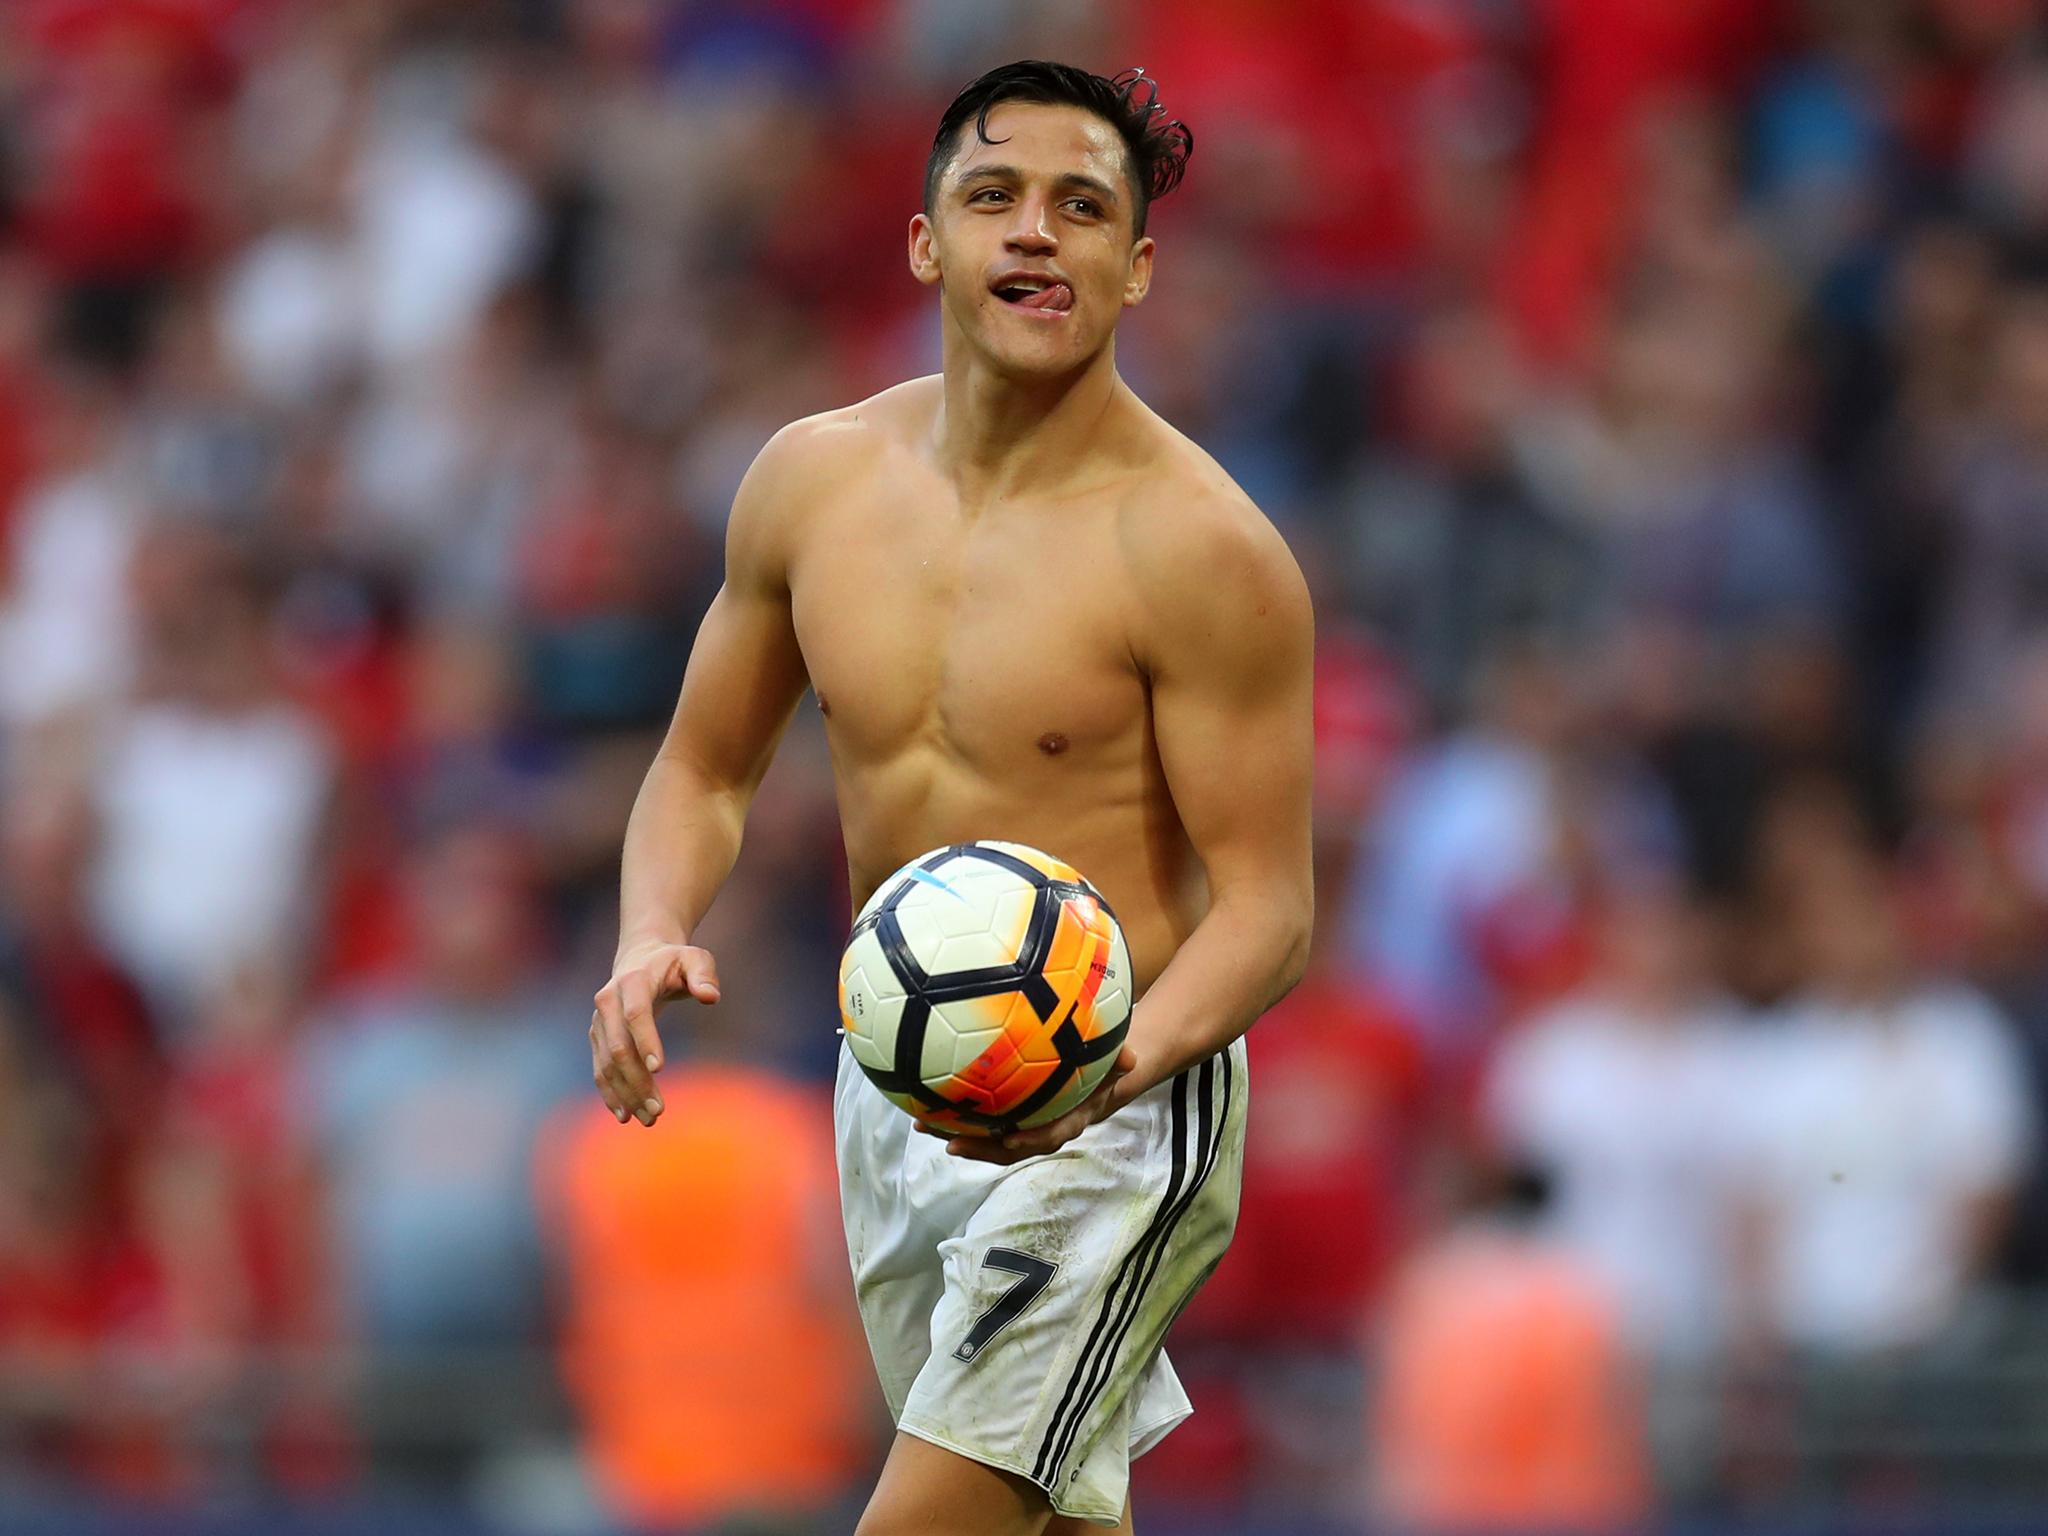 Alexis Sanchez admits he's still settling in at Manchester United as life is 'very different' compared to Arsenal